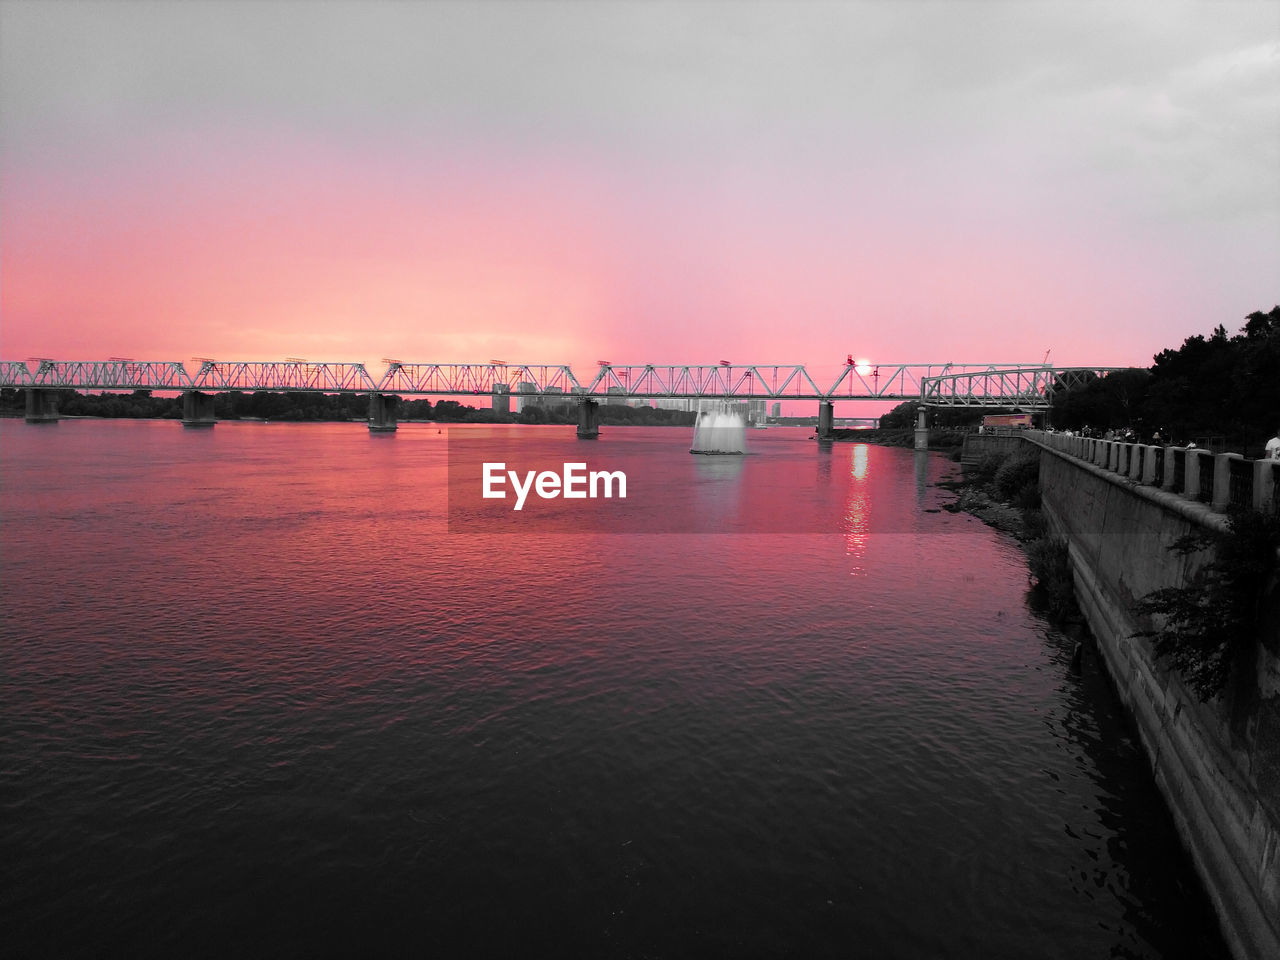 VIEW OF BRIDGE OVER RIVER AGAINST SKY DURING SUNSET